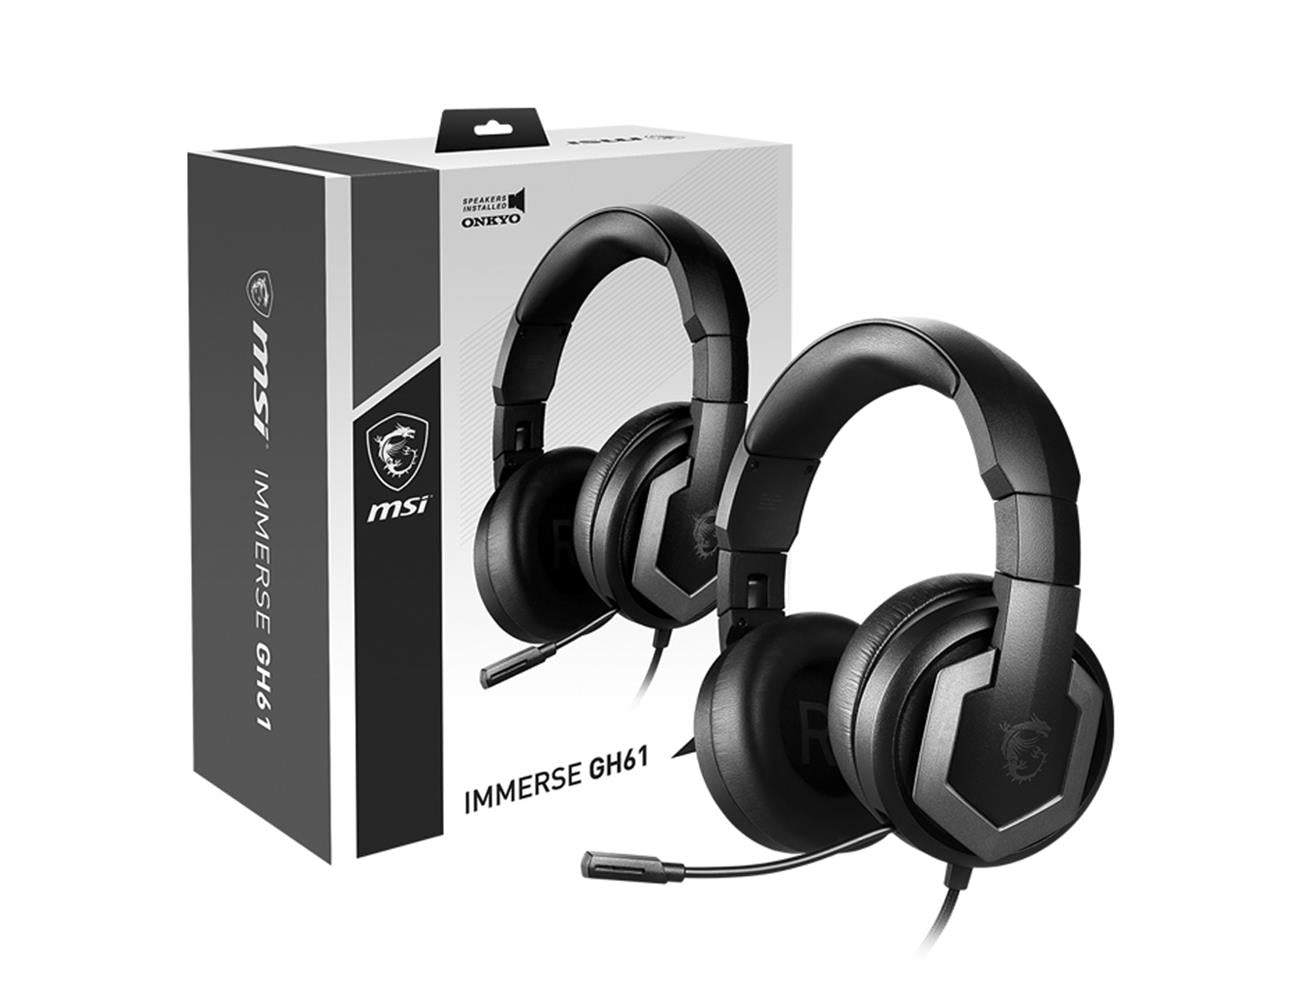 MSI IMMERSE GH61 Wired Gaming Headset